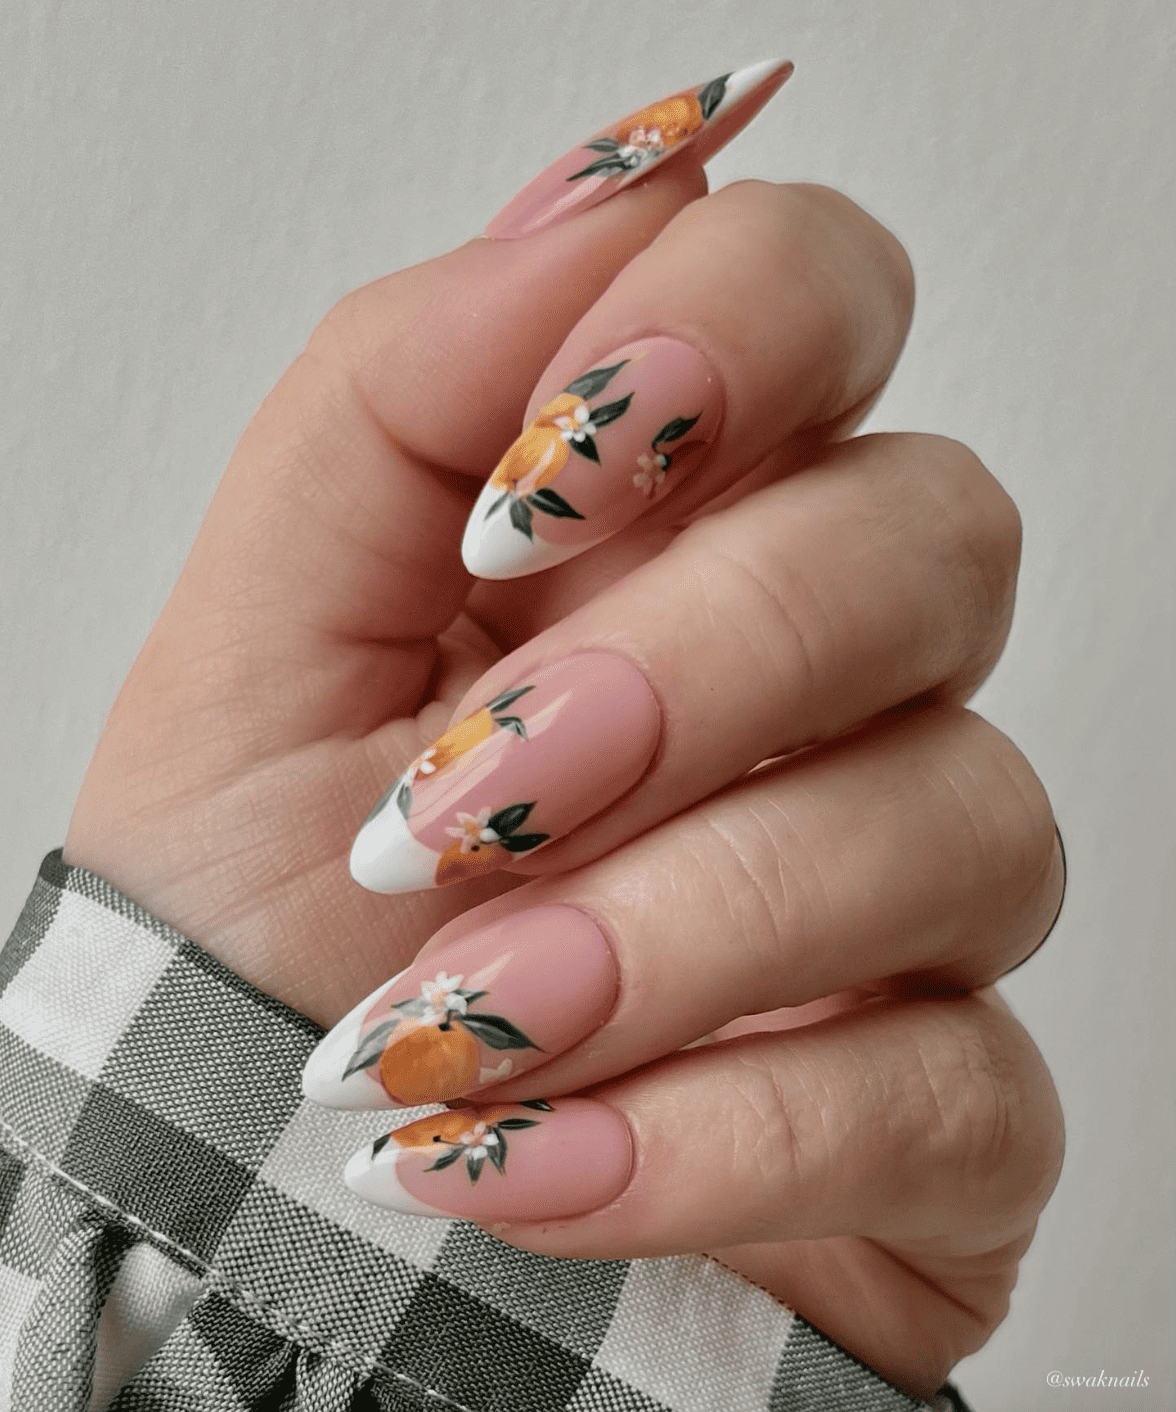 A hand with long almond nails featuring white French tips and nail art of oranges with leaves and flowers